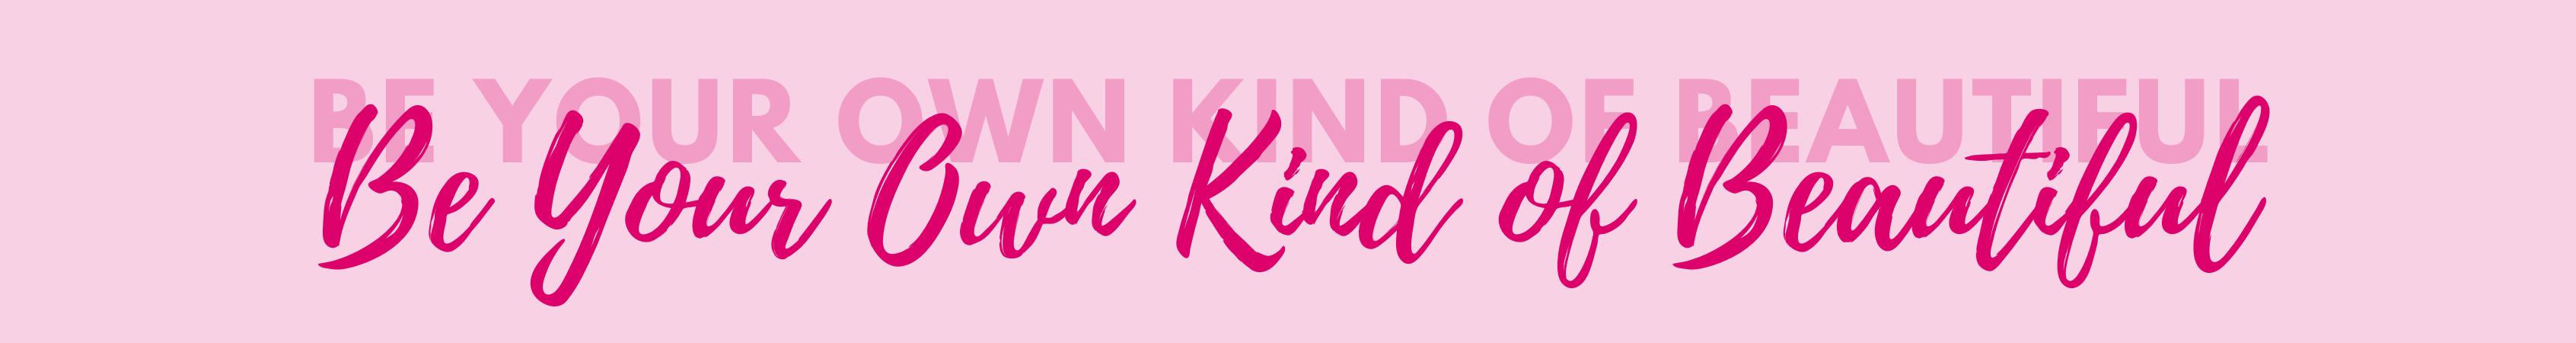 A banner image with our motto: Be Your Own Kind of Beautiful